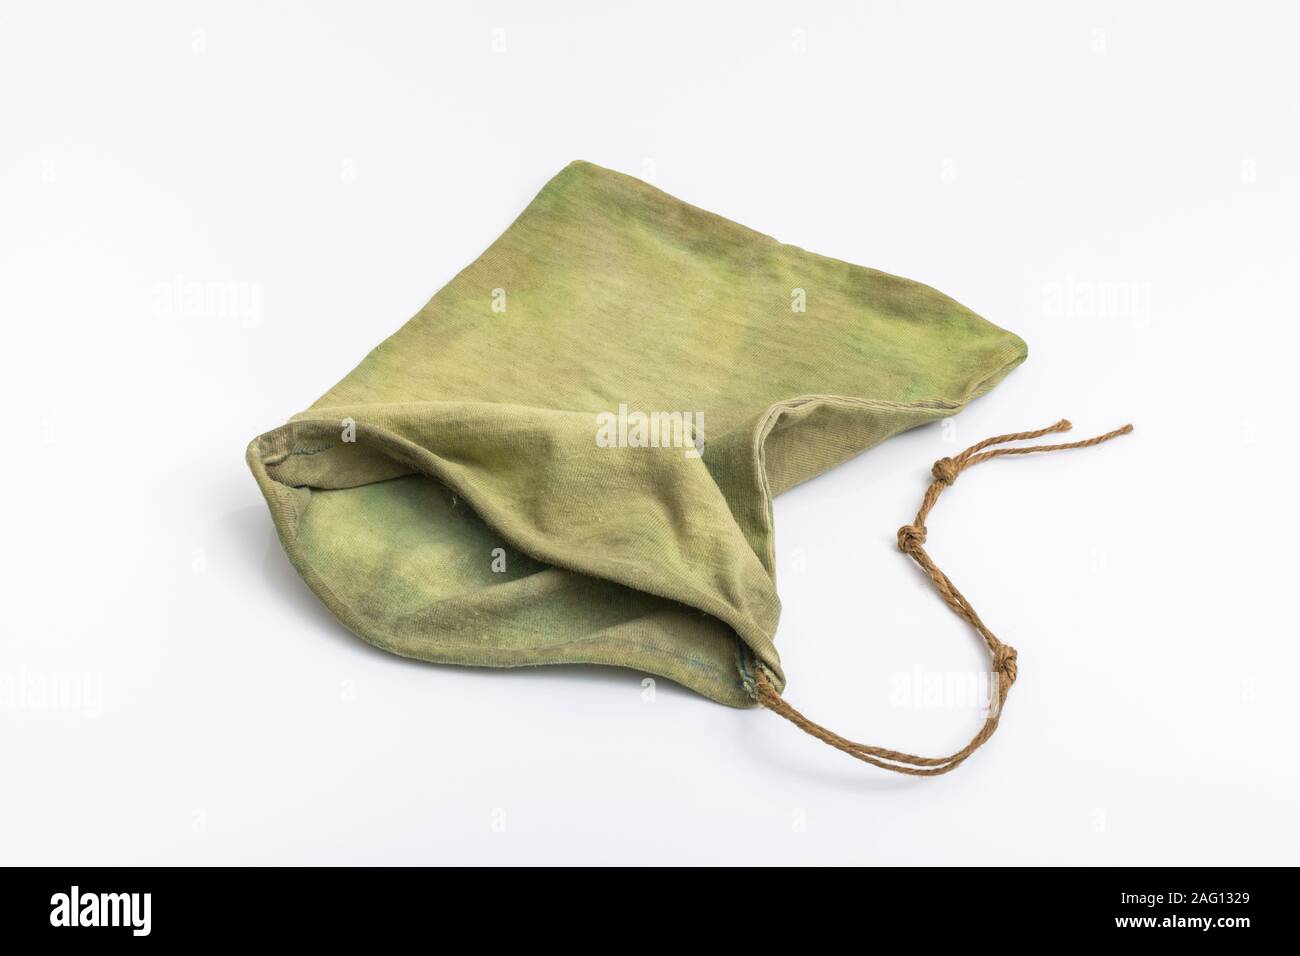 Small rustic possibles bag / ditty bag on off-white plain background. Metaphor survival skills, survival knowledge, bushcraft. Stock Photo